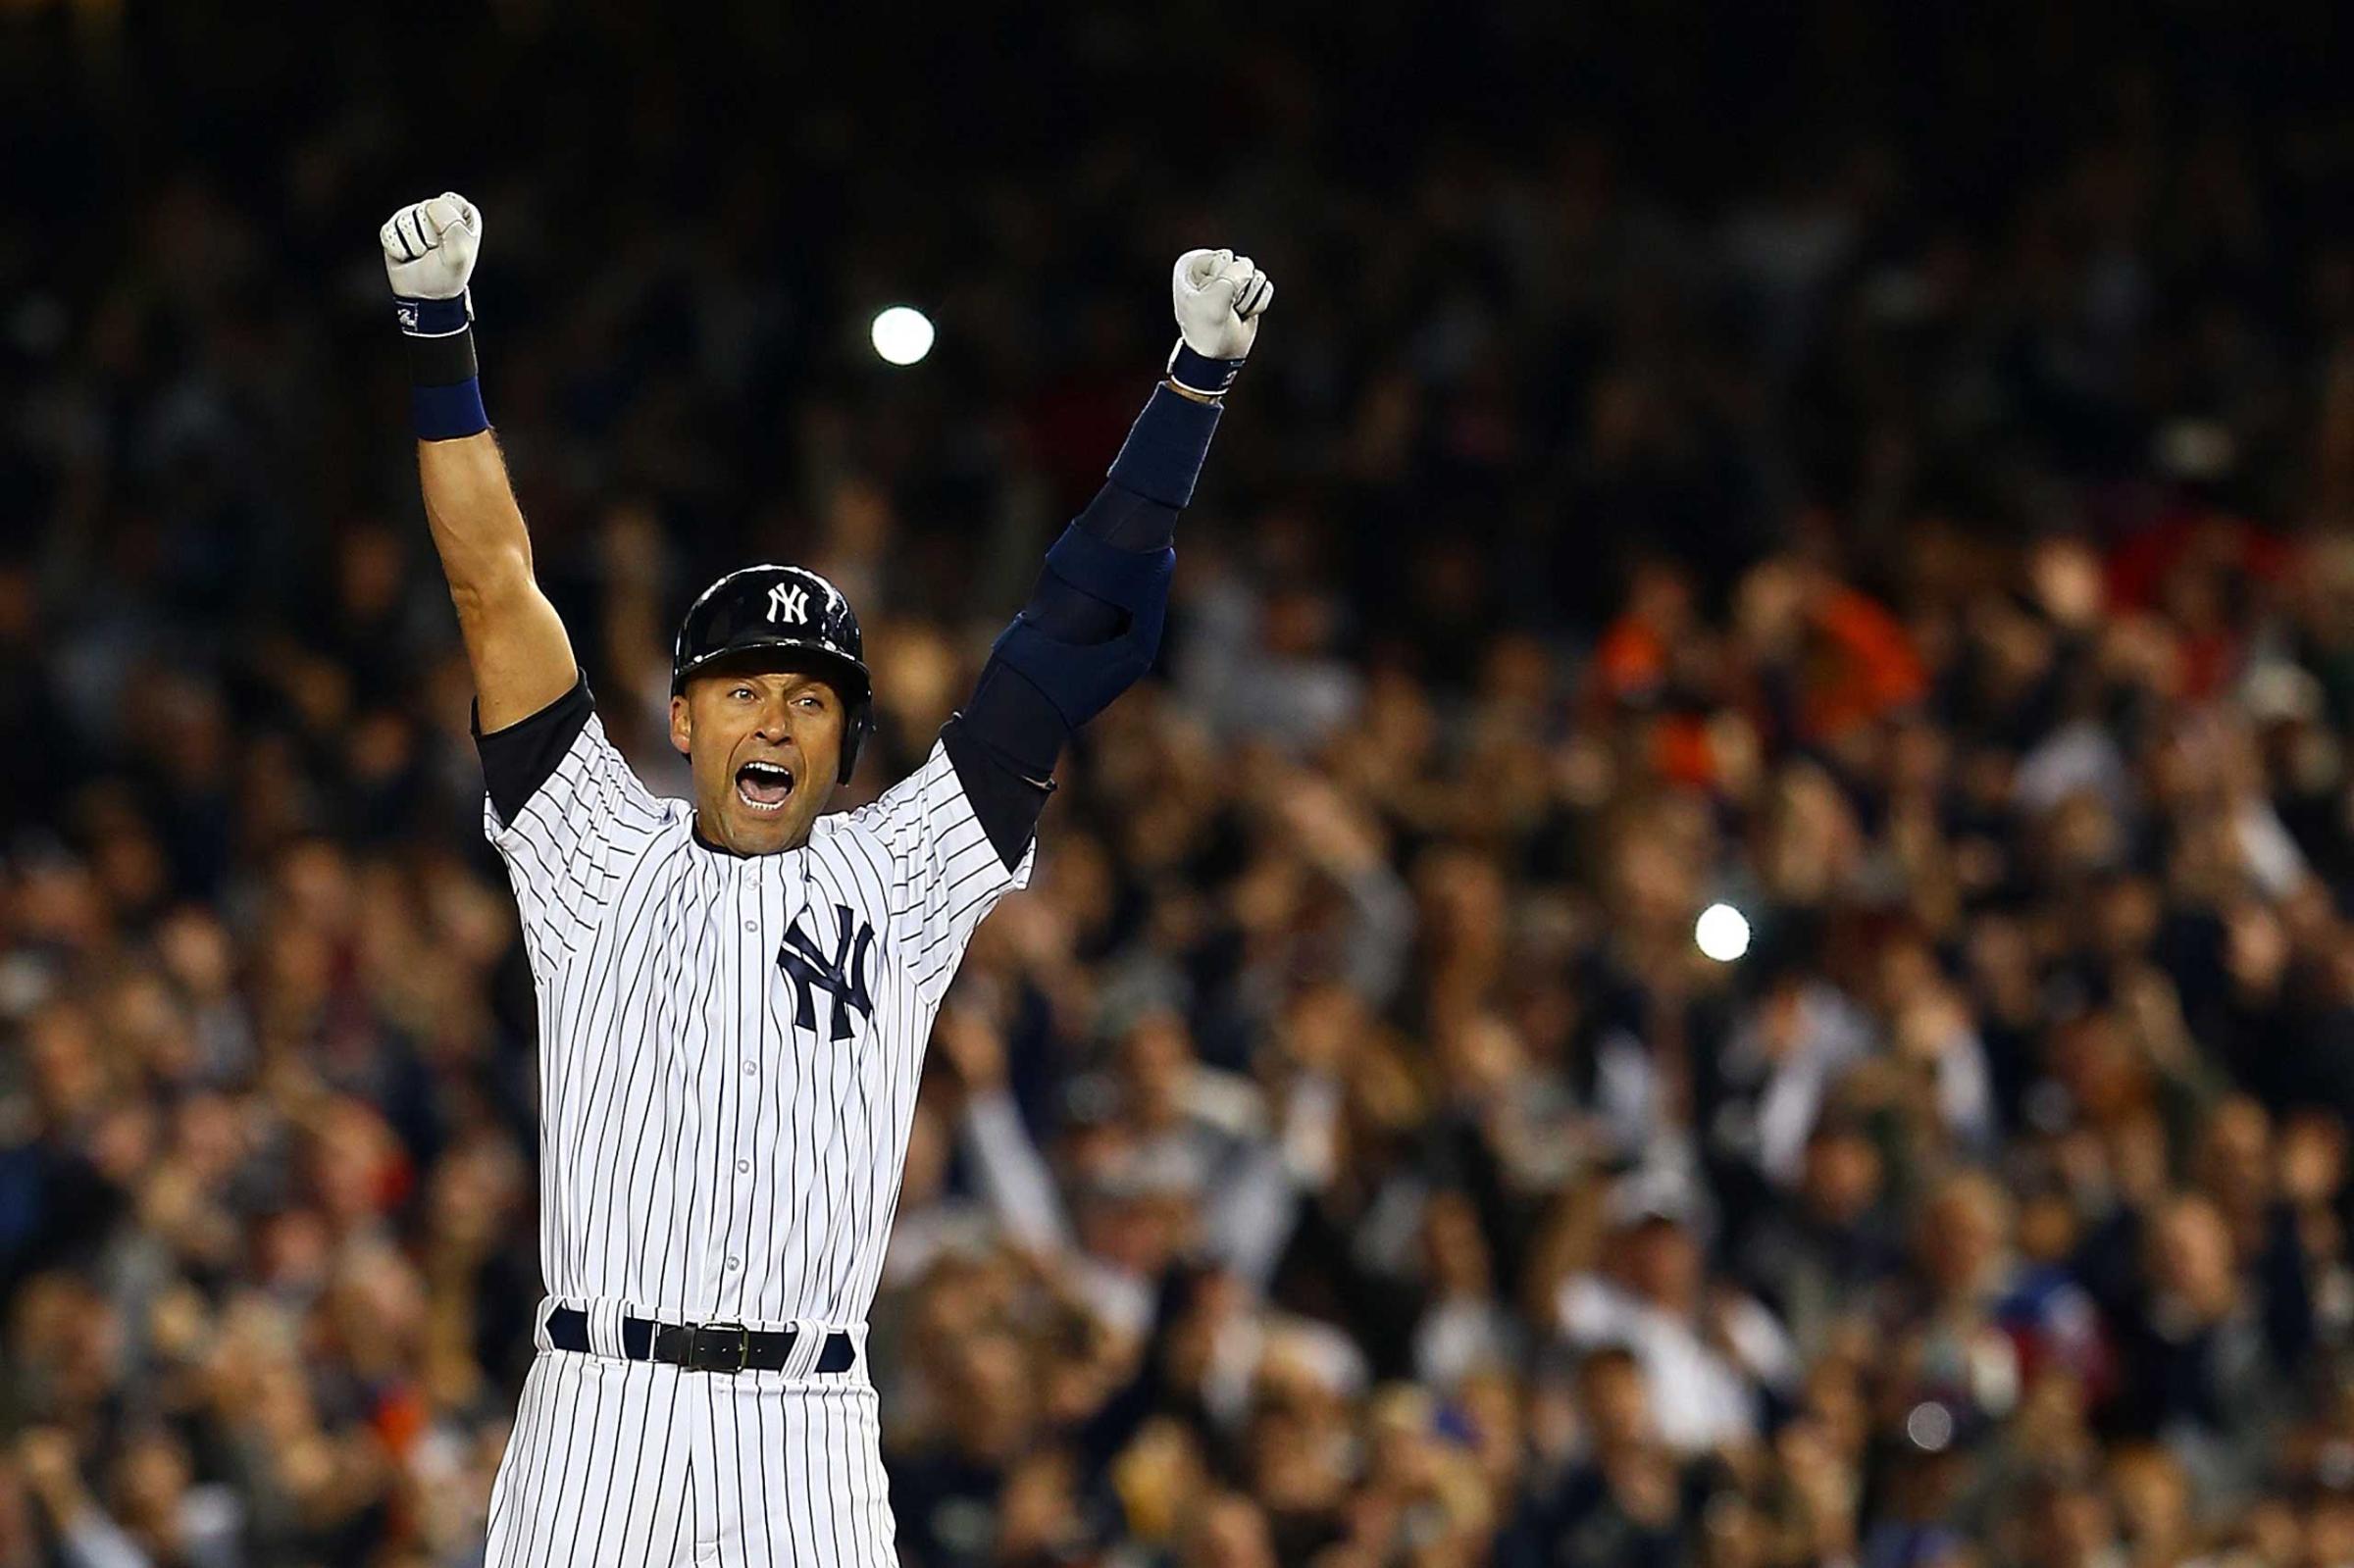 Derek Jeter celebrates after a game winning RBI hit in the ninth inning against the Baltimore Orioles in his last game ever at Yankee Stadium on Sept. 25, 2014 .